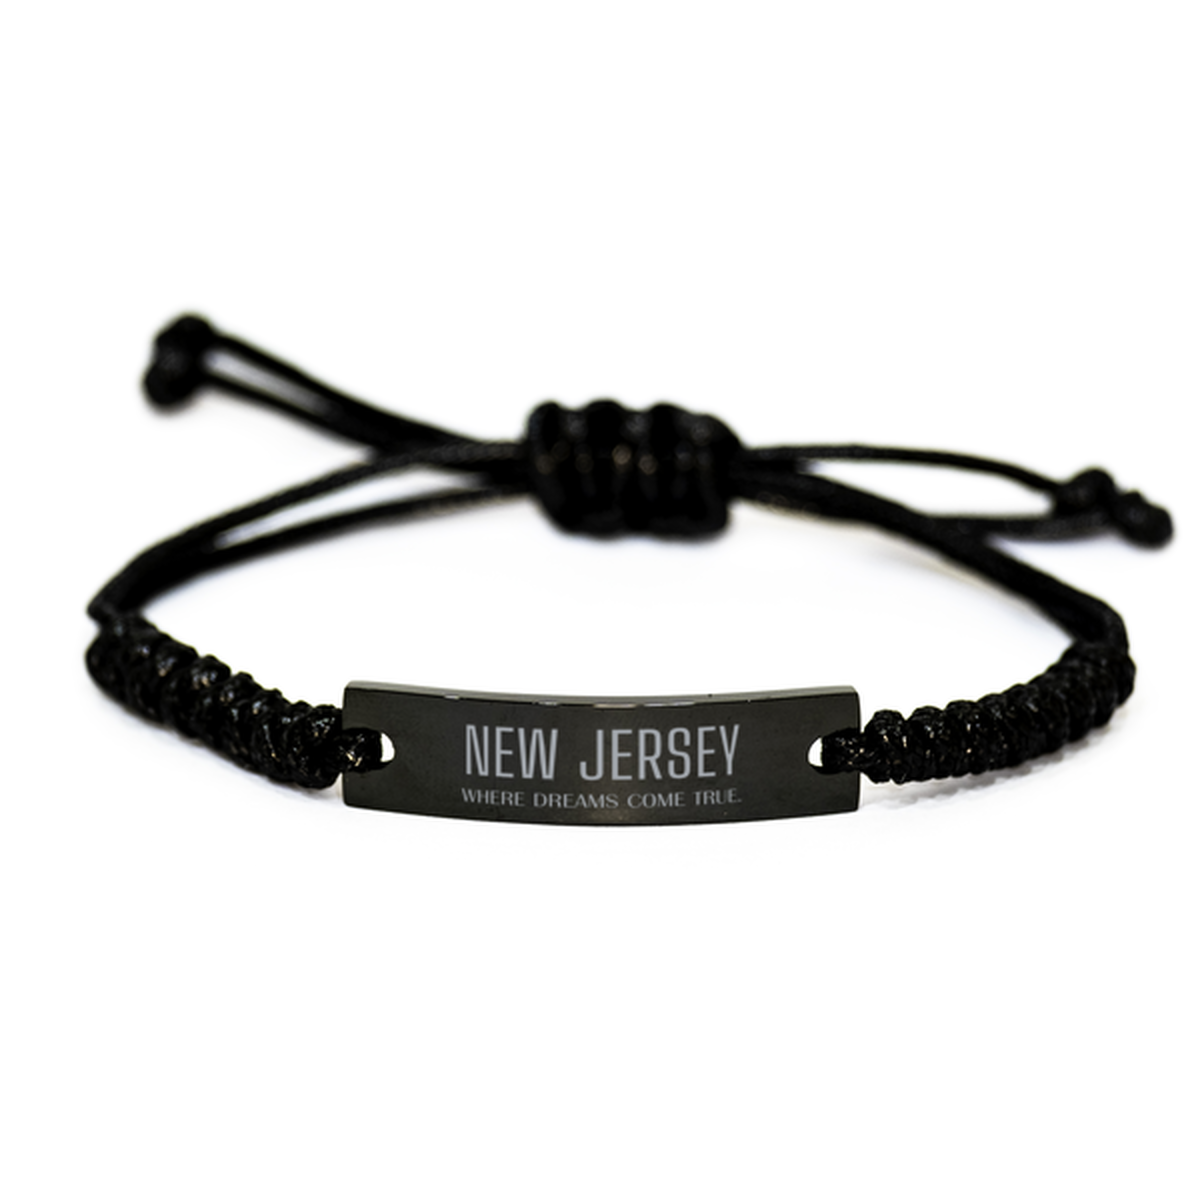 Love New Jersey State Black Rope Bracelet, New Jersey Where dreams come true, Birthday Inspirational Gifts For New Jersey Men, Women, Friends